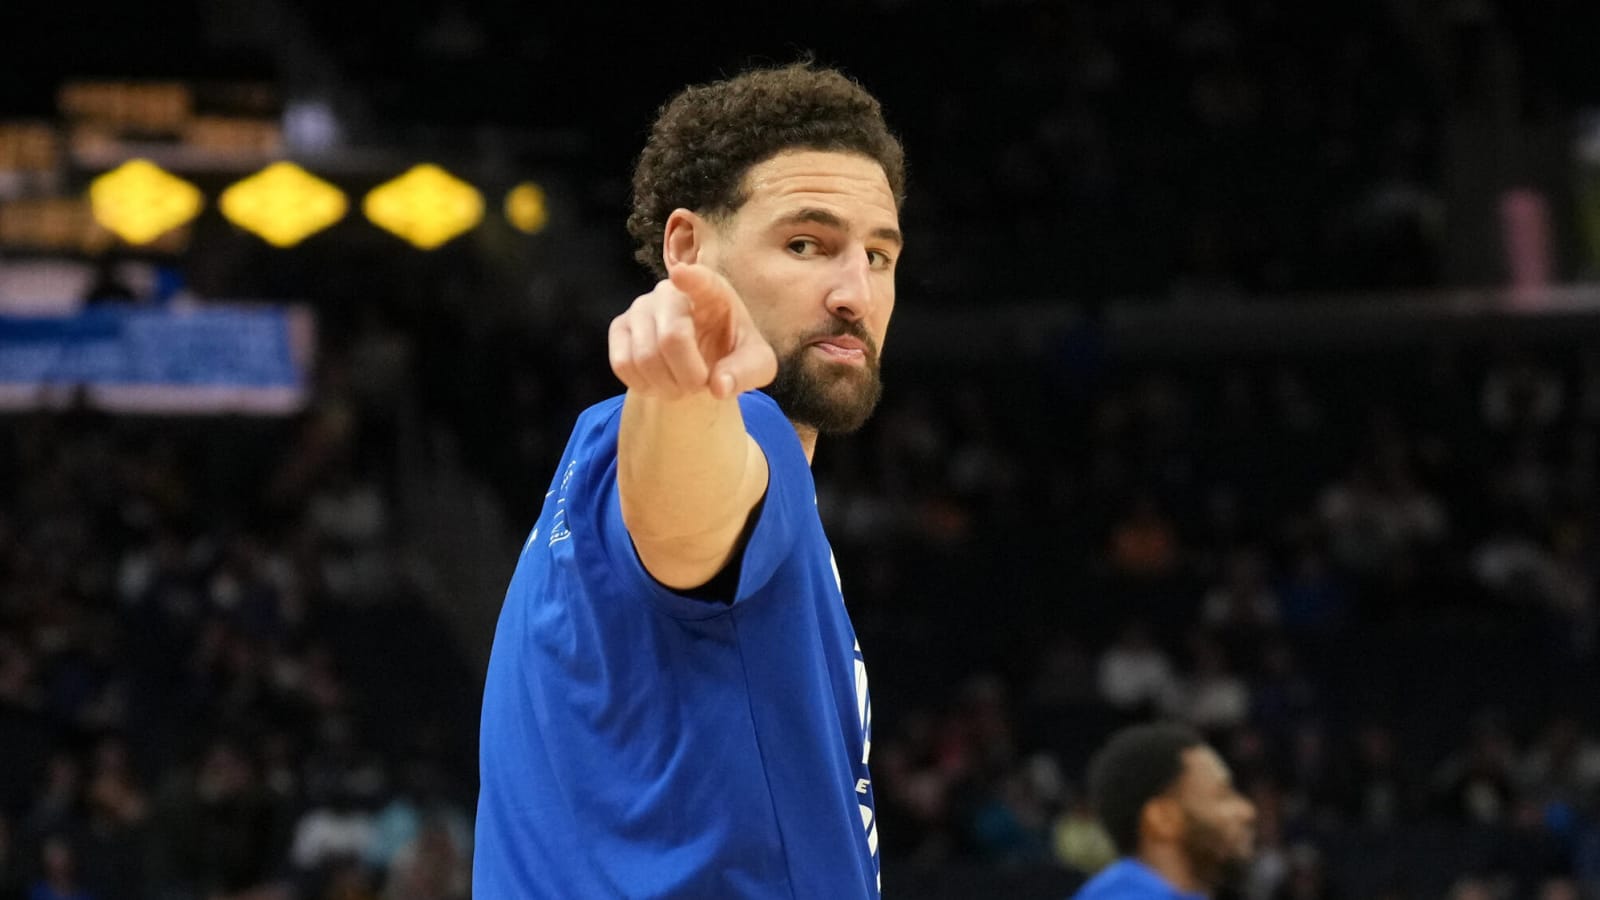 Report: Klay Thompson Open To Re-Signing With Warriors On Short-Term Deal